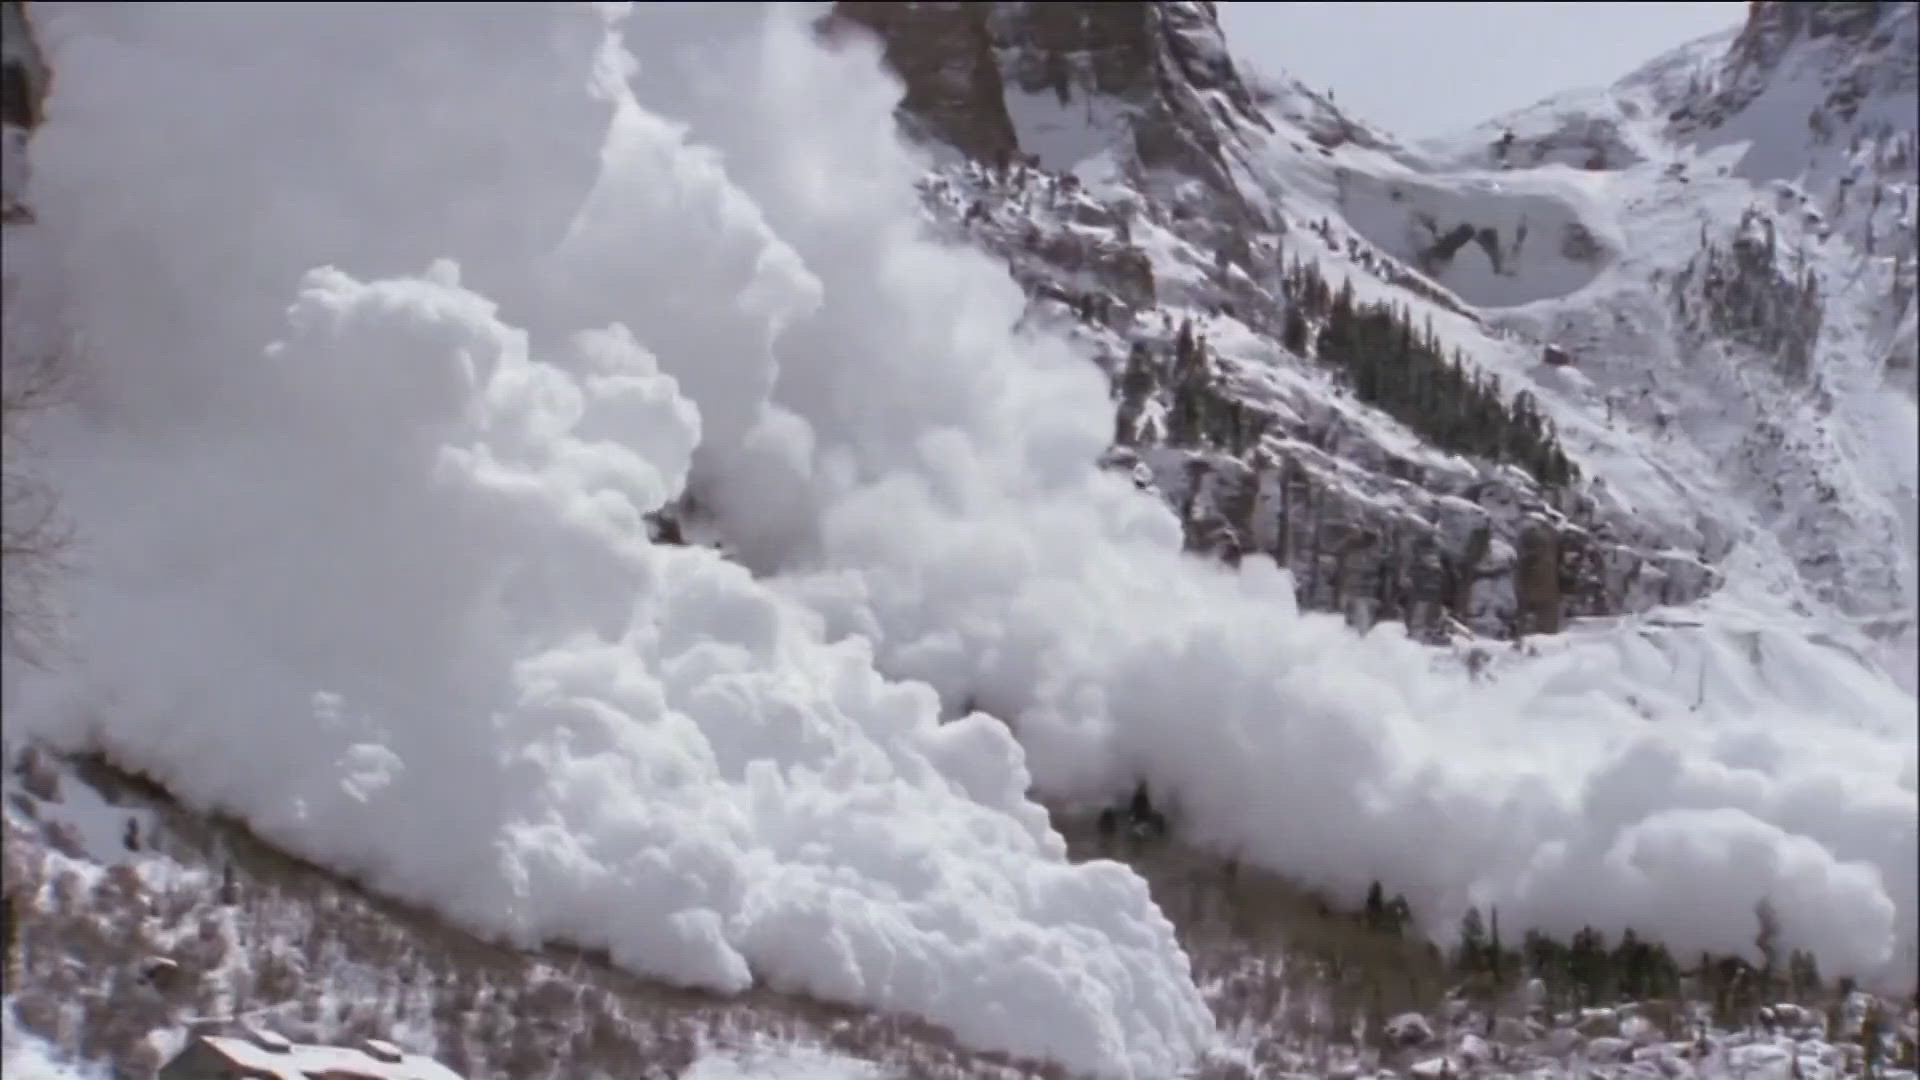 On Tuesday, the Sawtooth Avalanche Center said the danger was 'extreme' for parts of their forecast area.